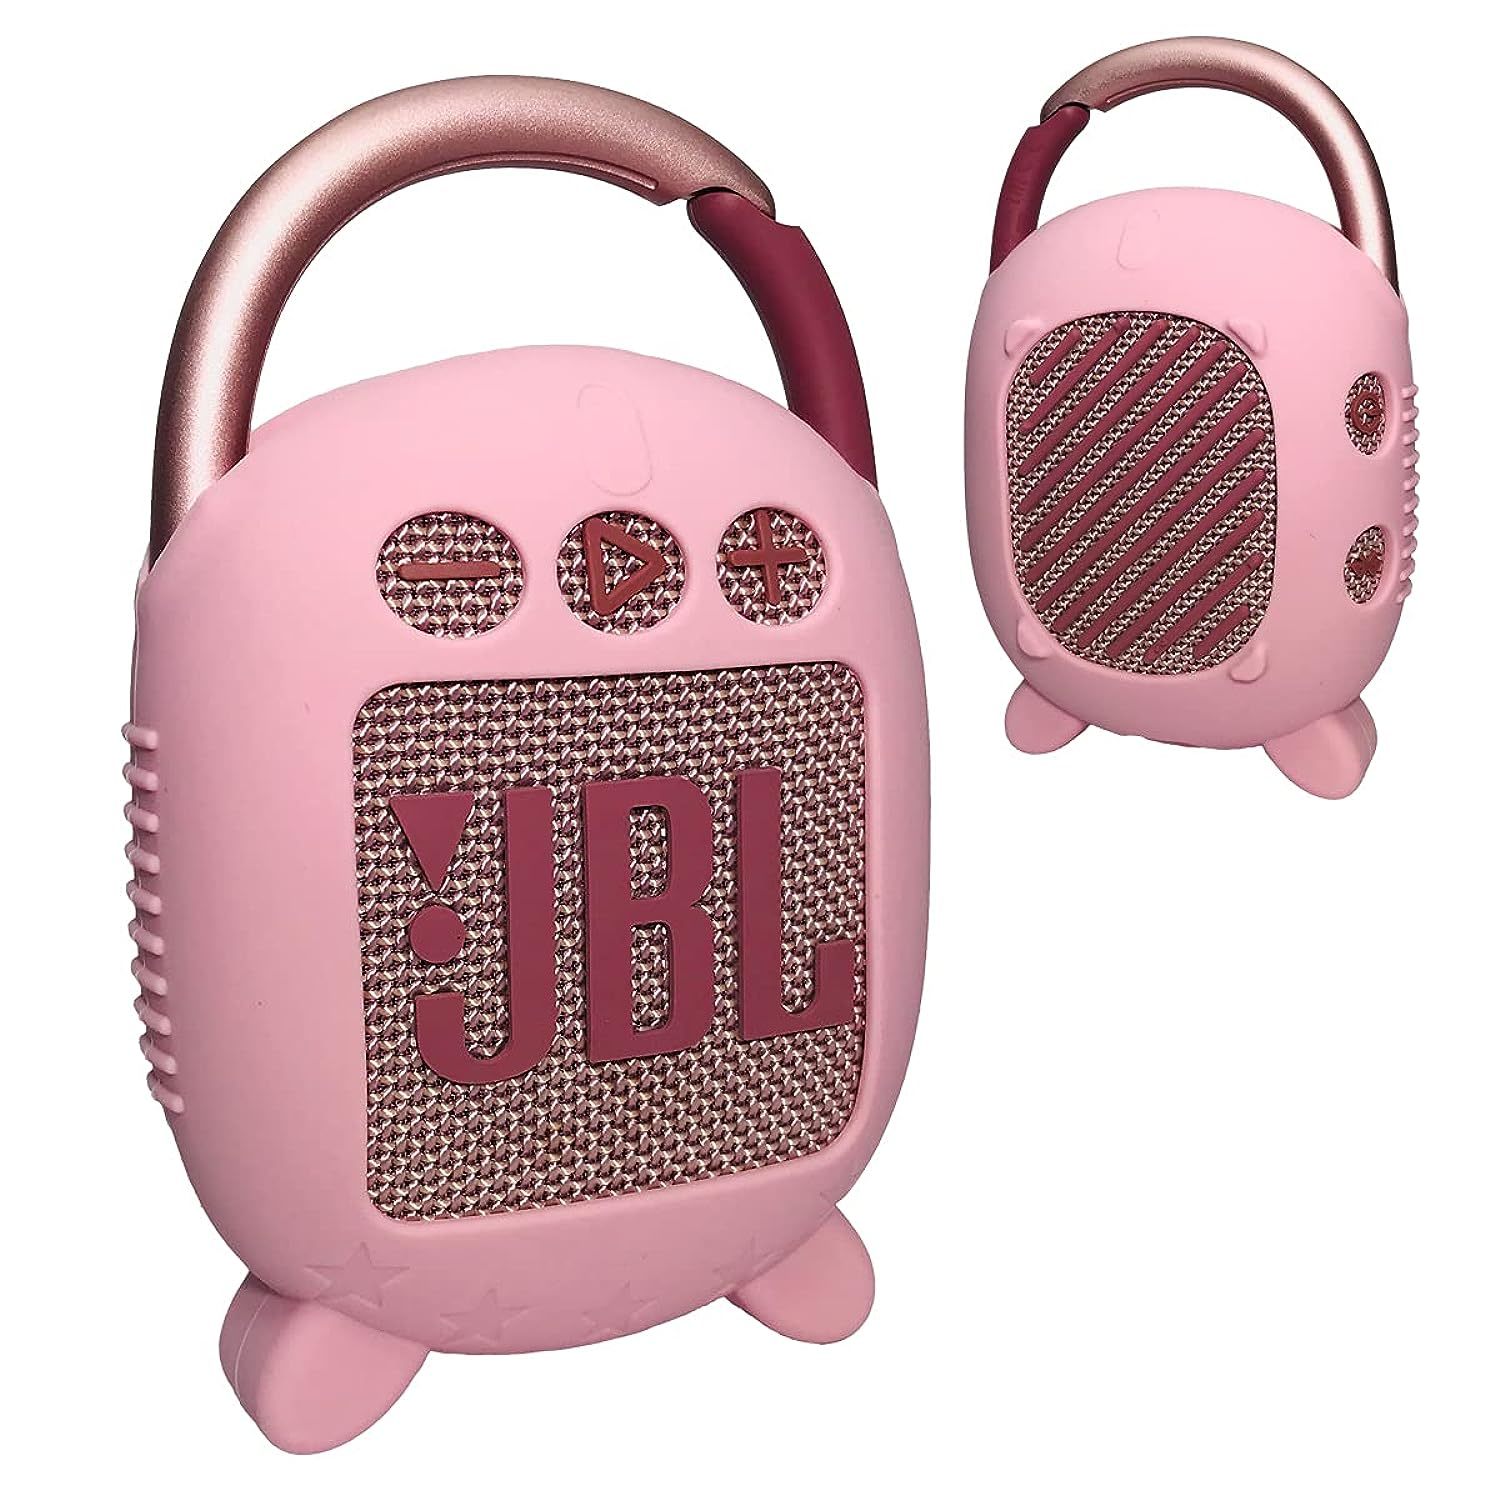 Primary image for Silicone Cover Case For Jbl Clip 4 Portable Bluetooth Speaker, Protective Carryi